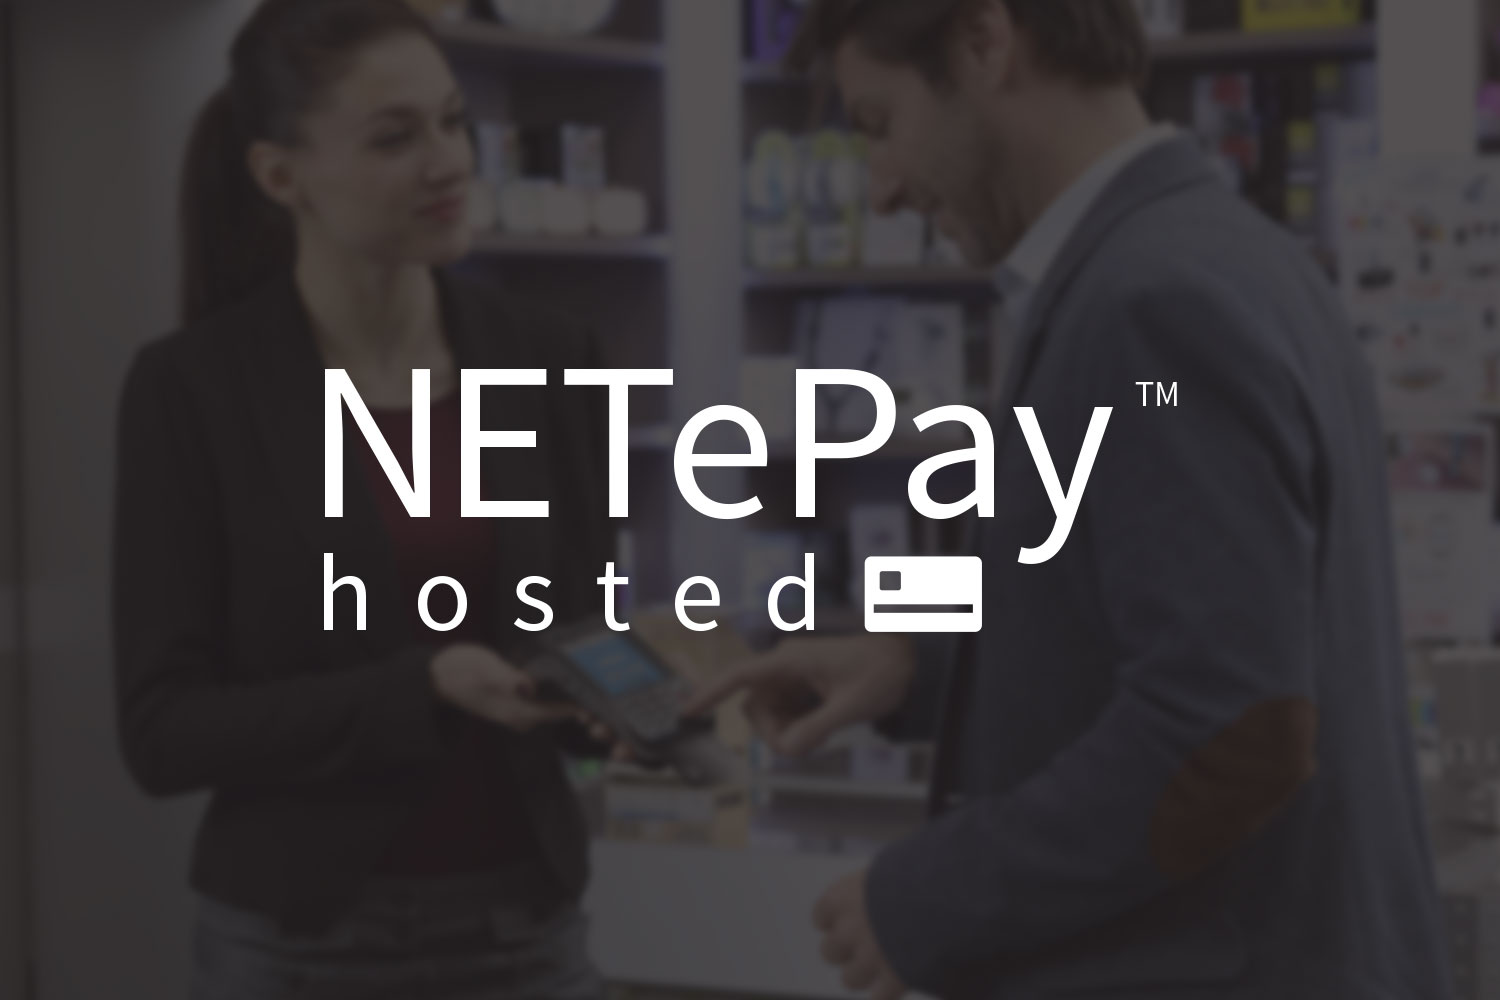 NETePay Hosted bolsters support for cross-platform tokenization, PCI-validated P2PE, ecommerce tie-ins and a plethora of mobile payments options, enabling a true omnichannel payments solution.